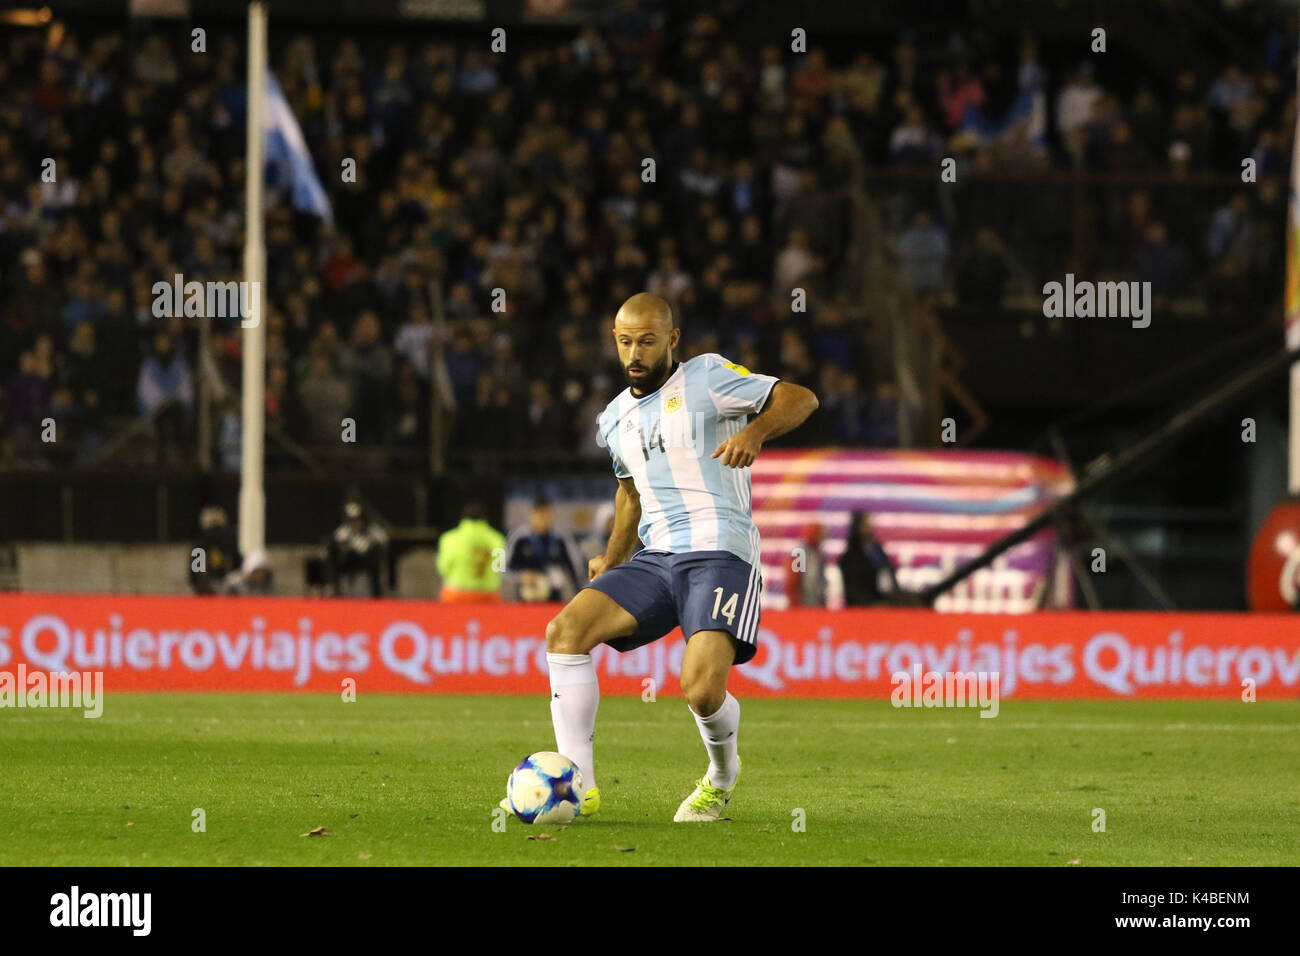 Buenos Aires, Argentina. 5th Sep, 2017. Javier Mascherano of Argentina during the match with Venezuela for 2018 Fifa World Cup for Conmebol at Monumental Stadium, Buenos Aires, Argentina. Credit: Néstor J. Beremblum/Alamy Live News Stock Photo